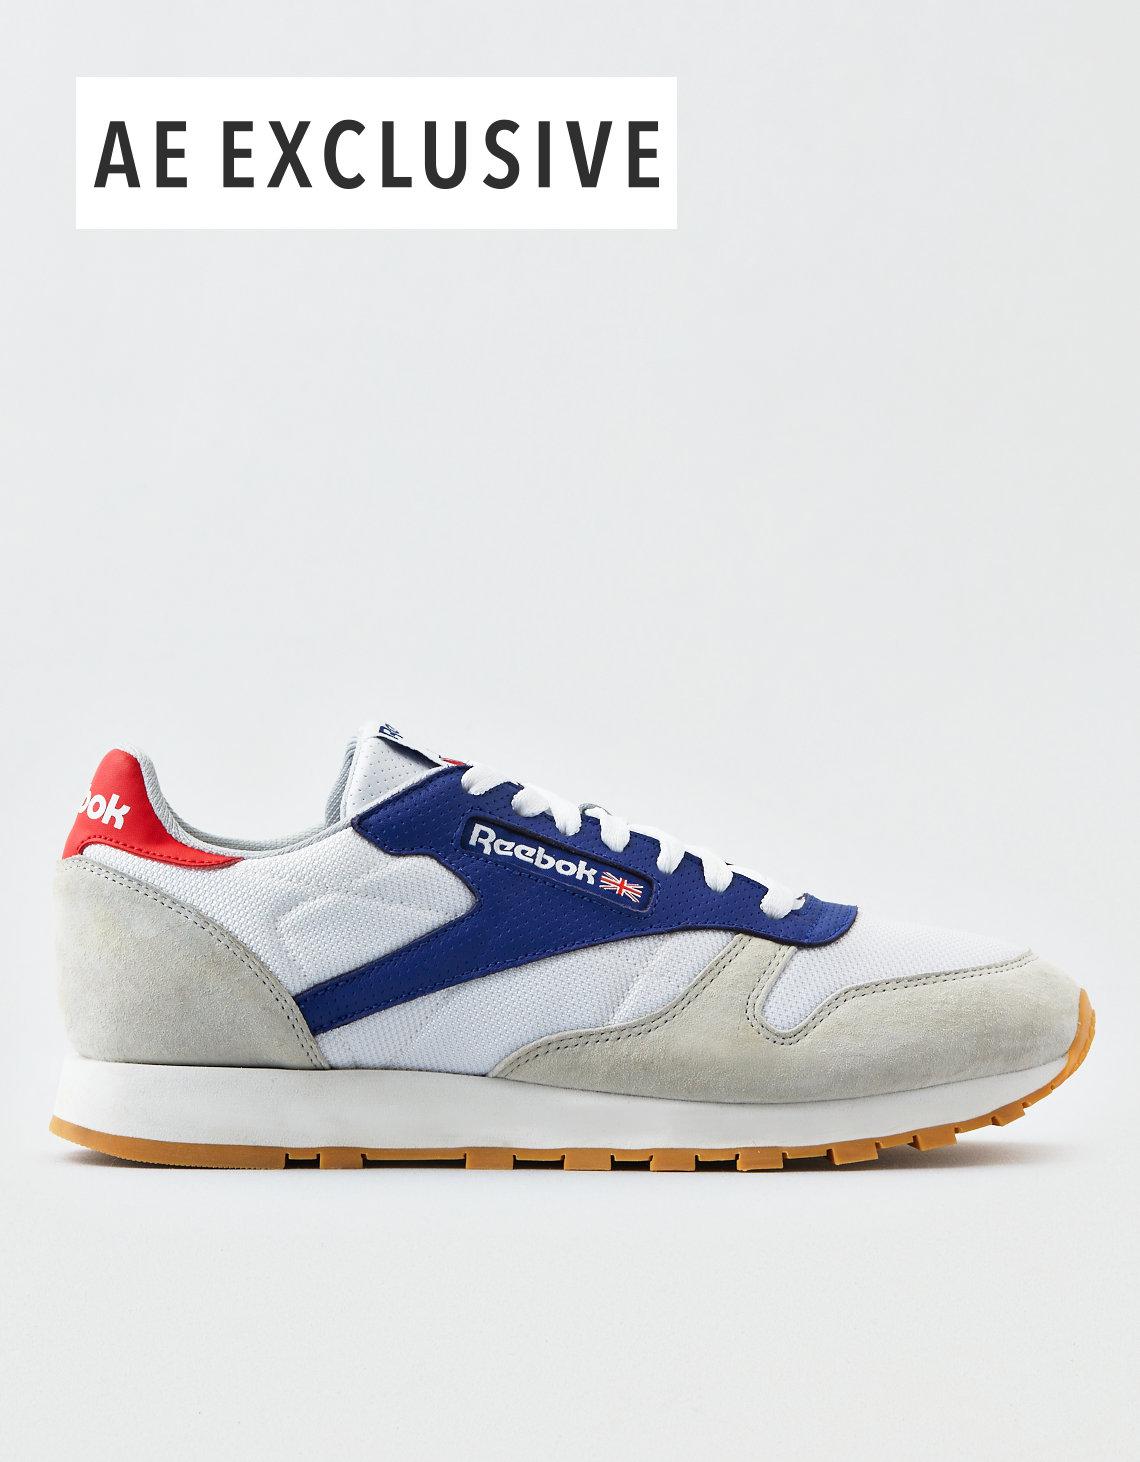 limited edition reebok x face classic leather sneaker